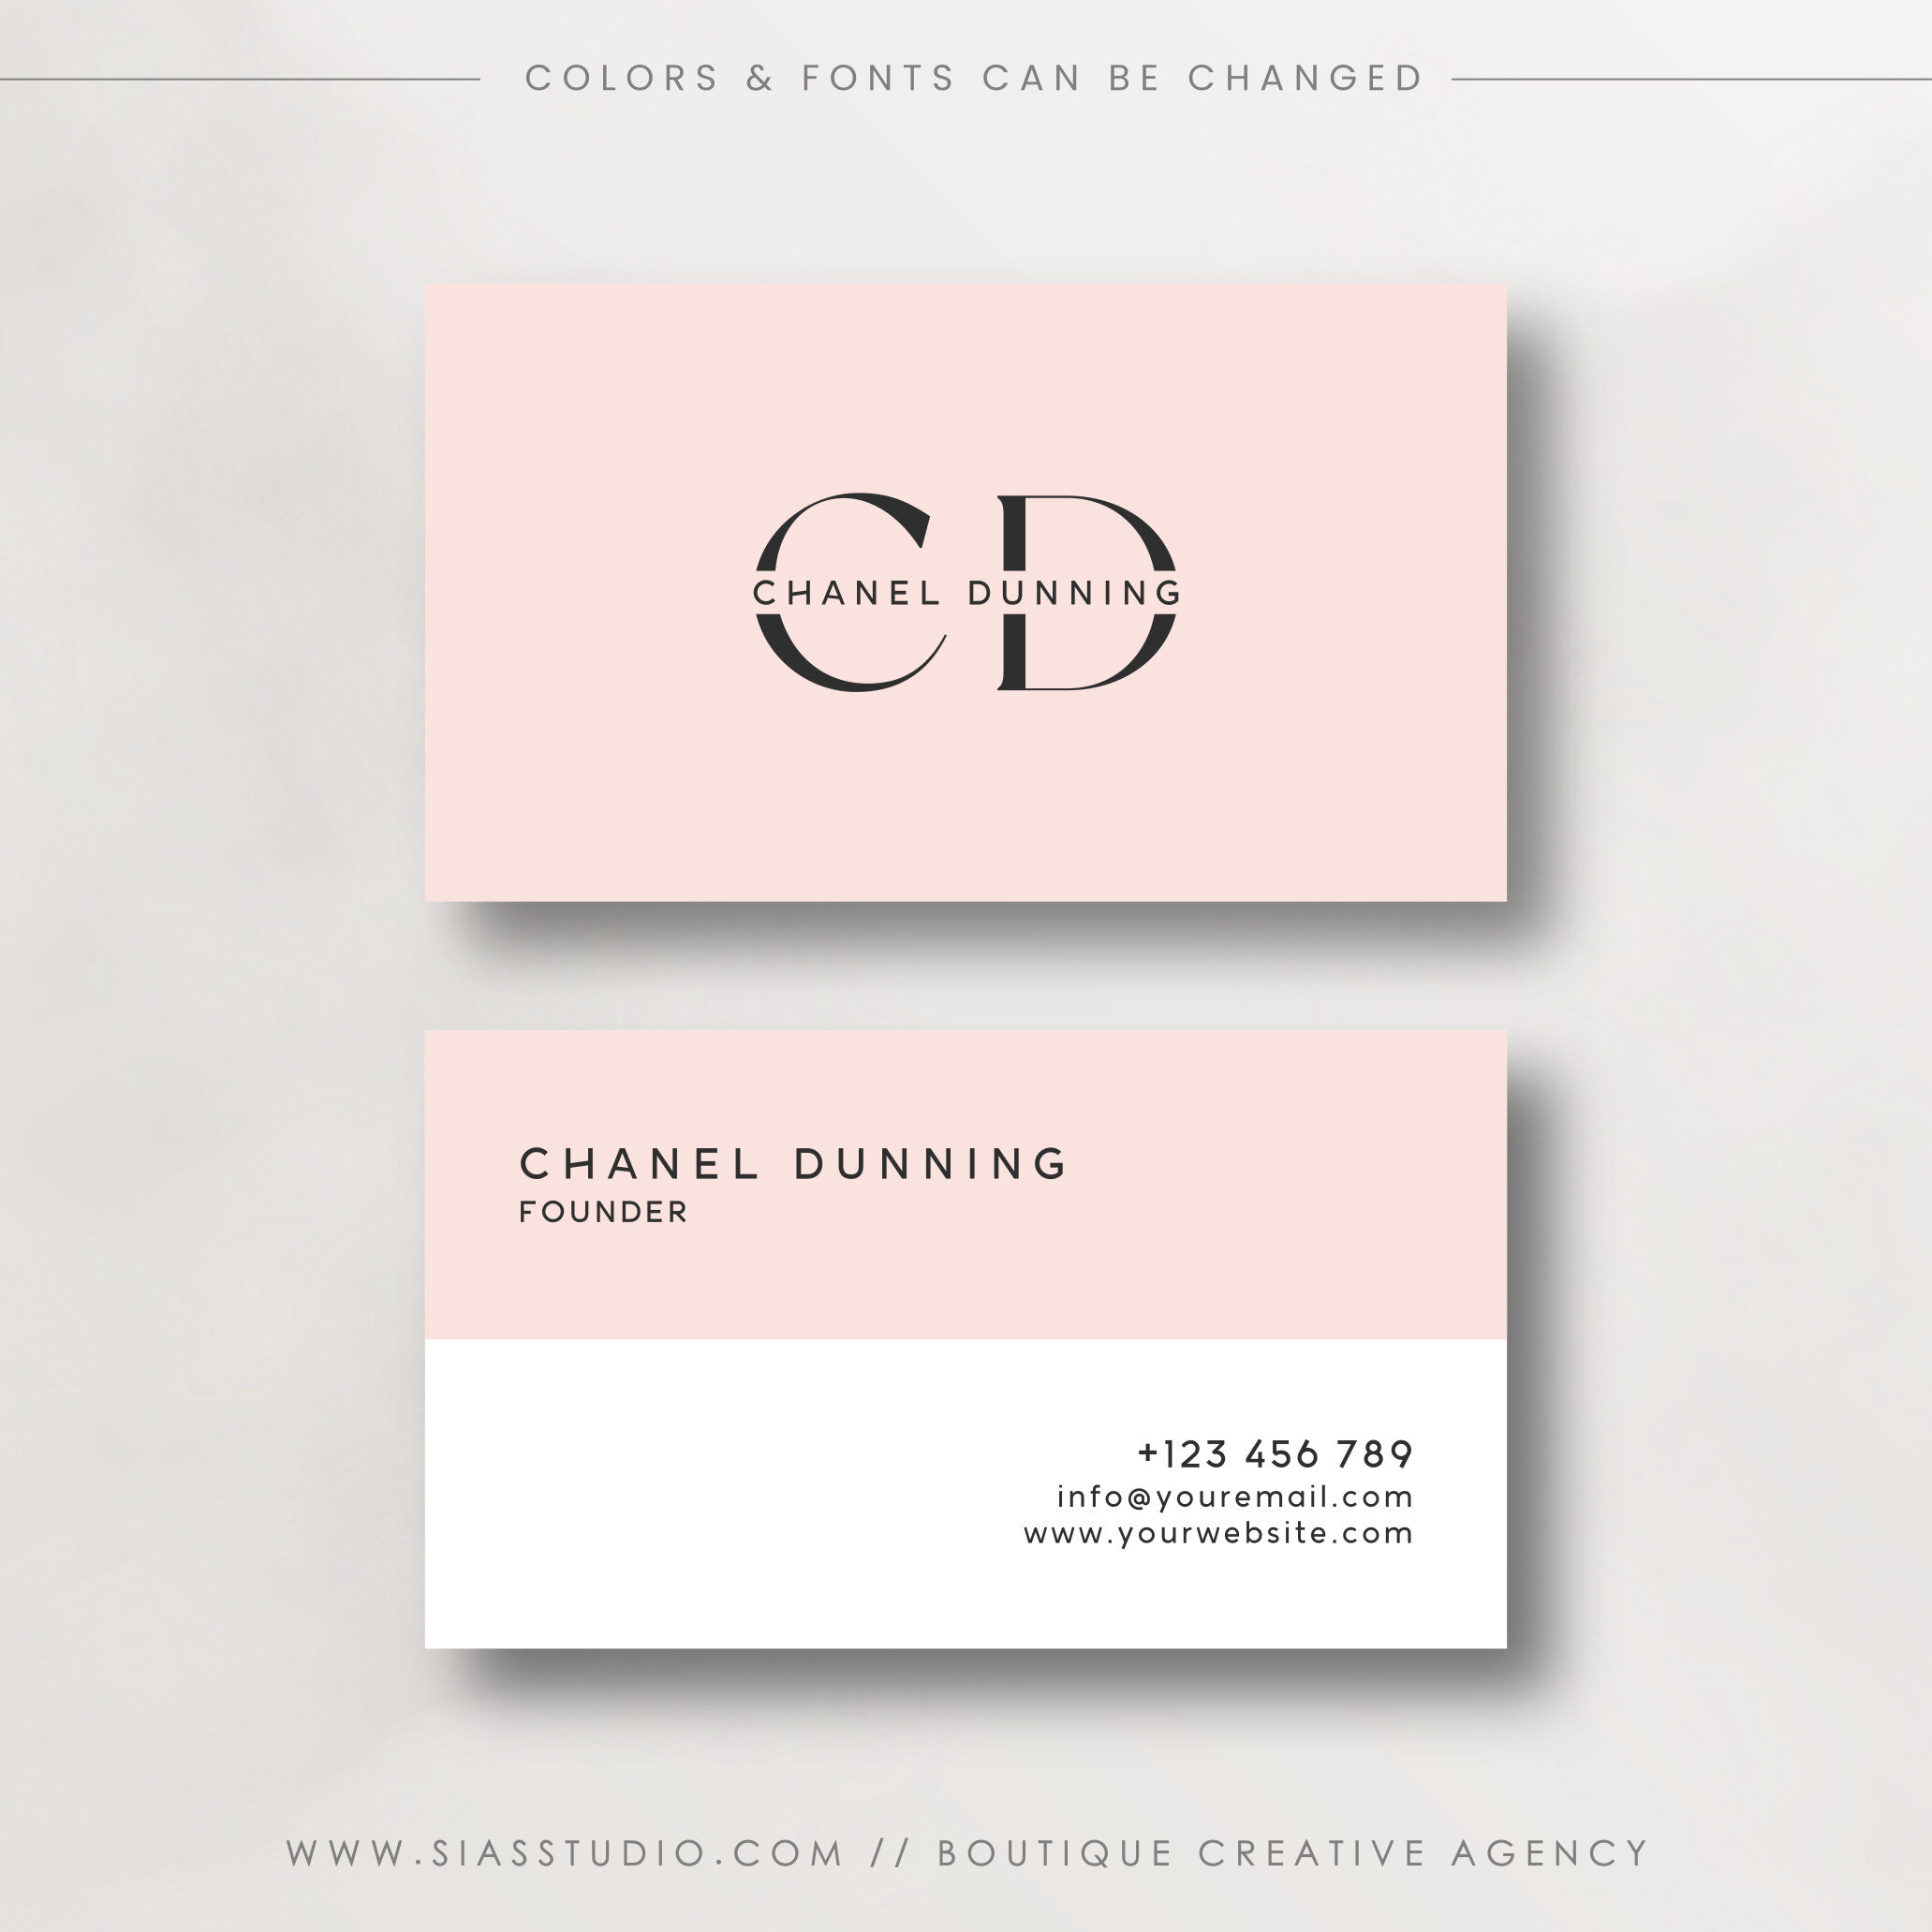 Chanel Dunning - Business card bicolor with initials - Sias Studio